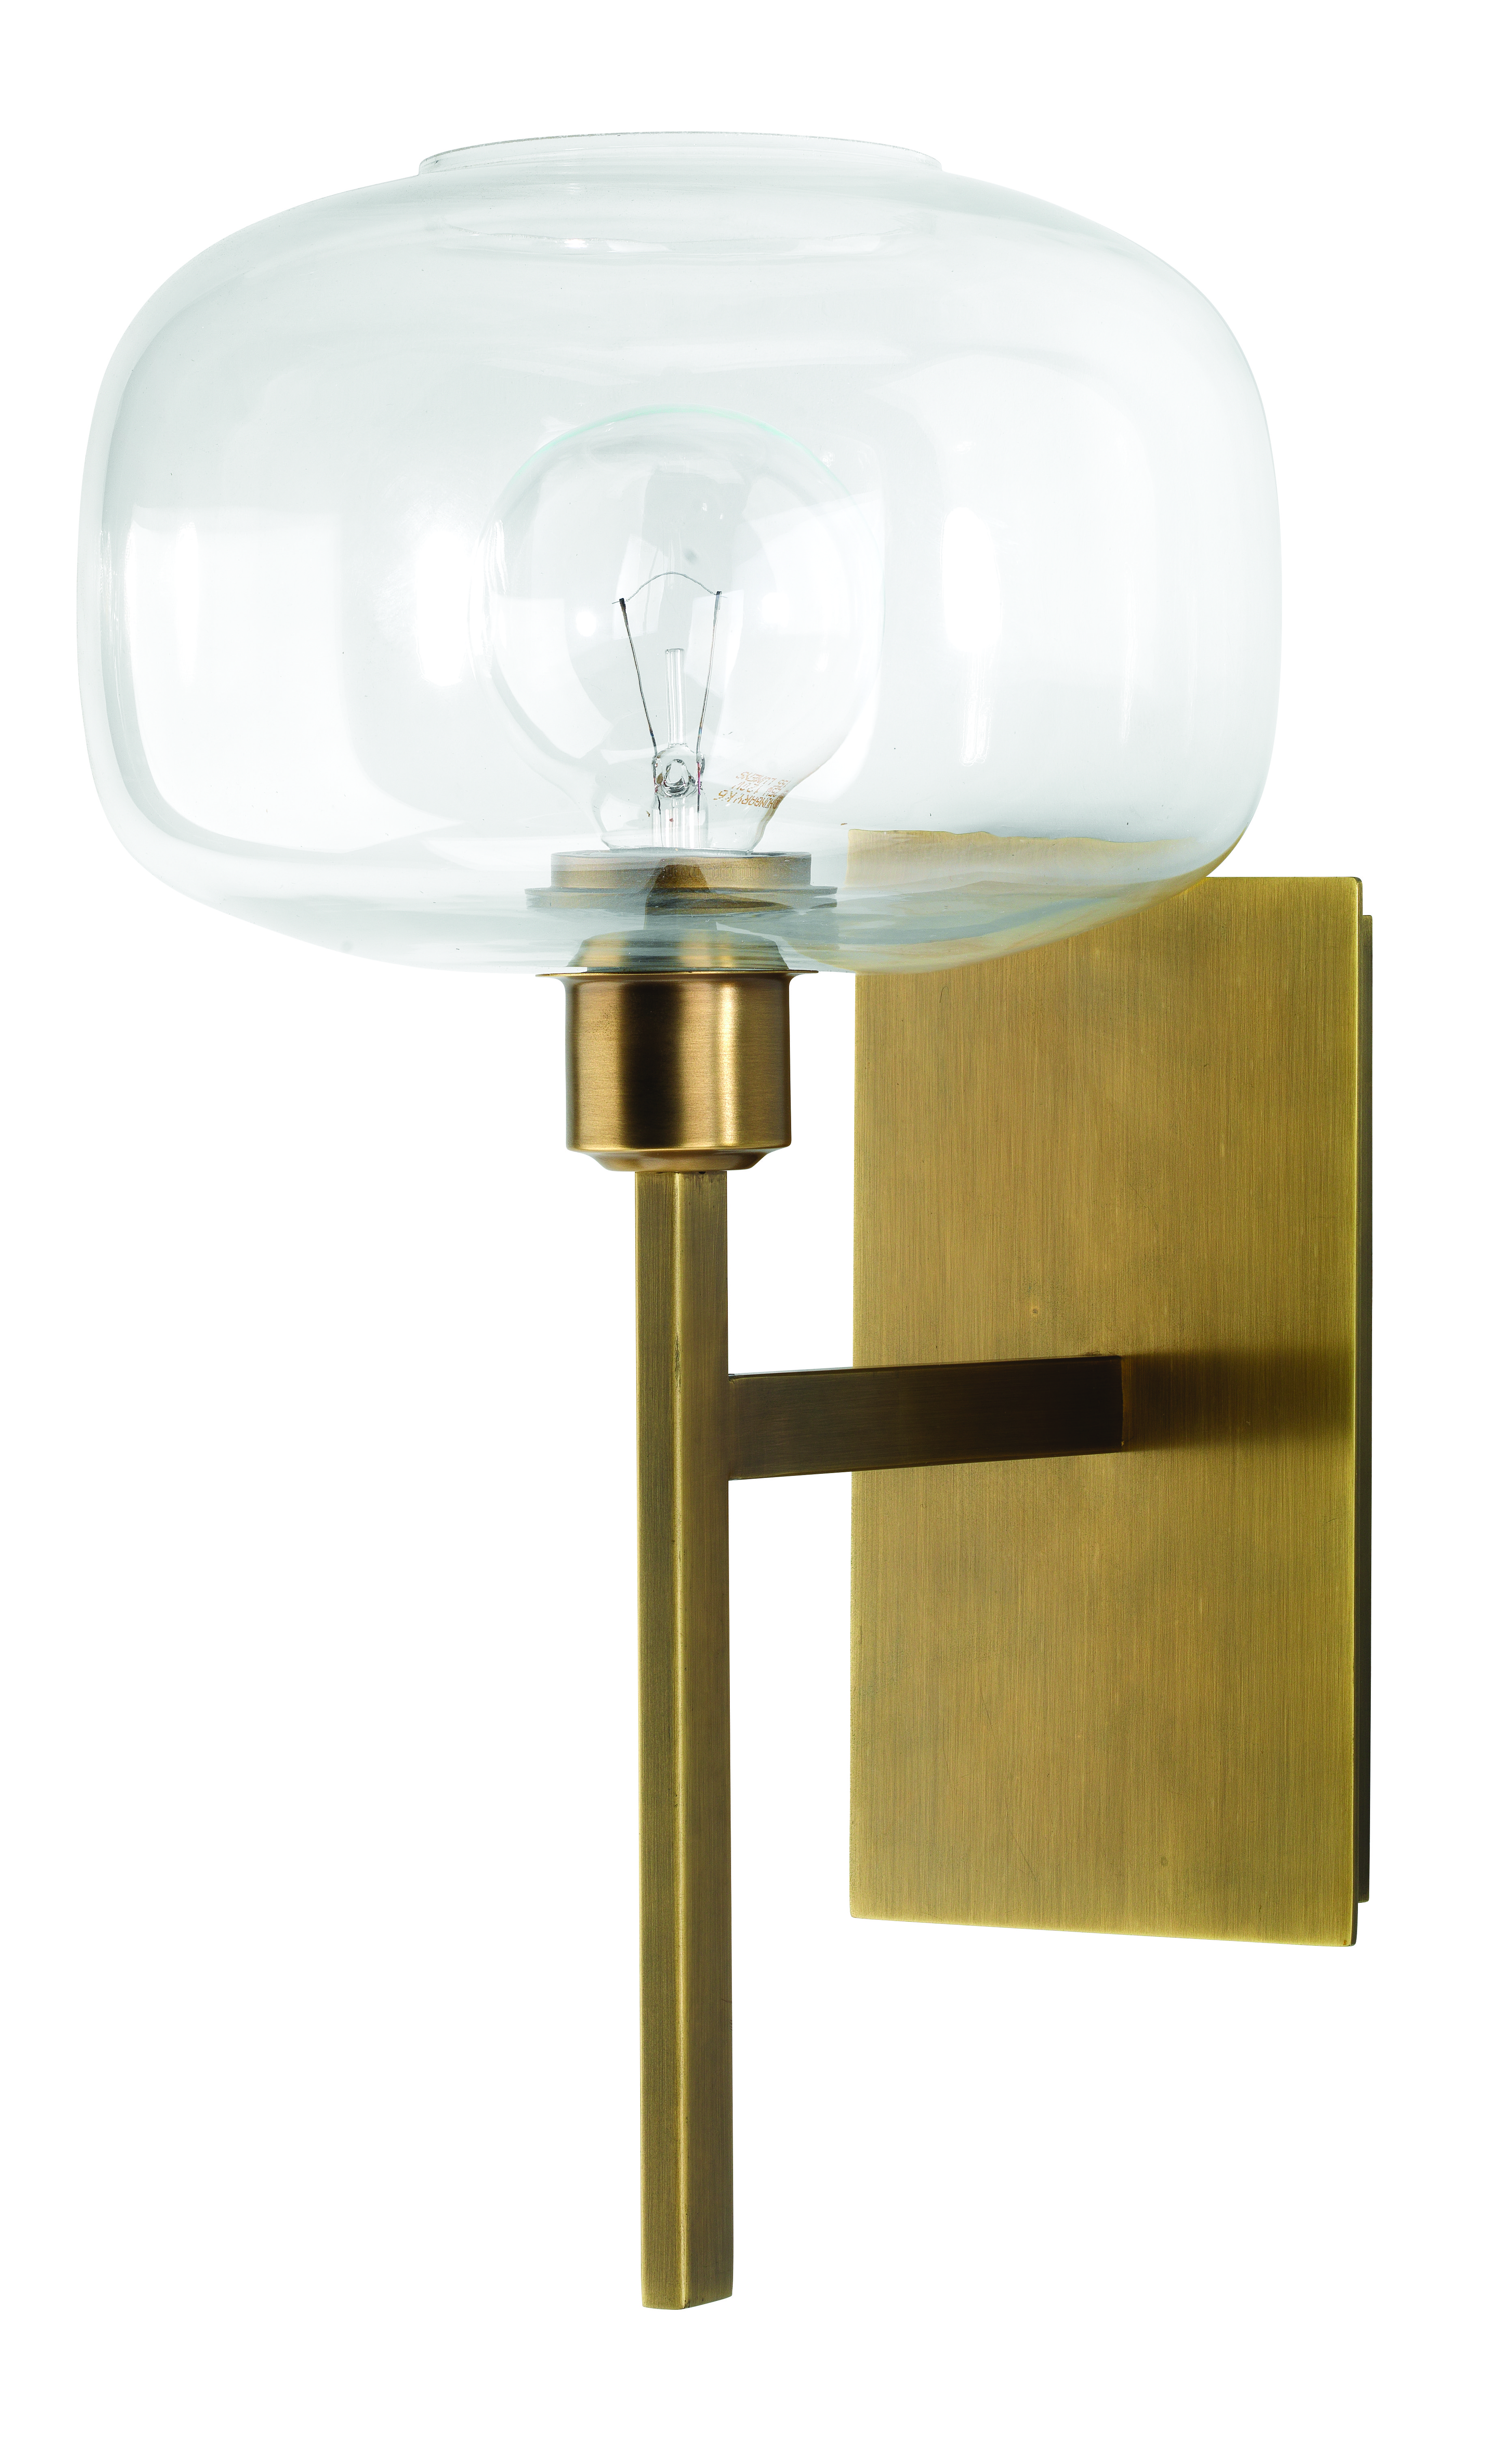 Jamie Young Scando Mod sconce